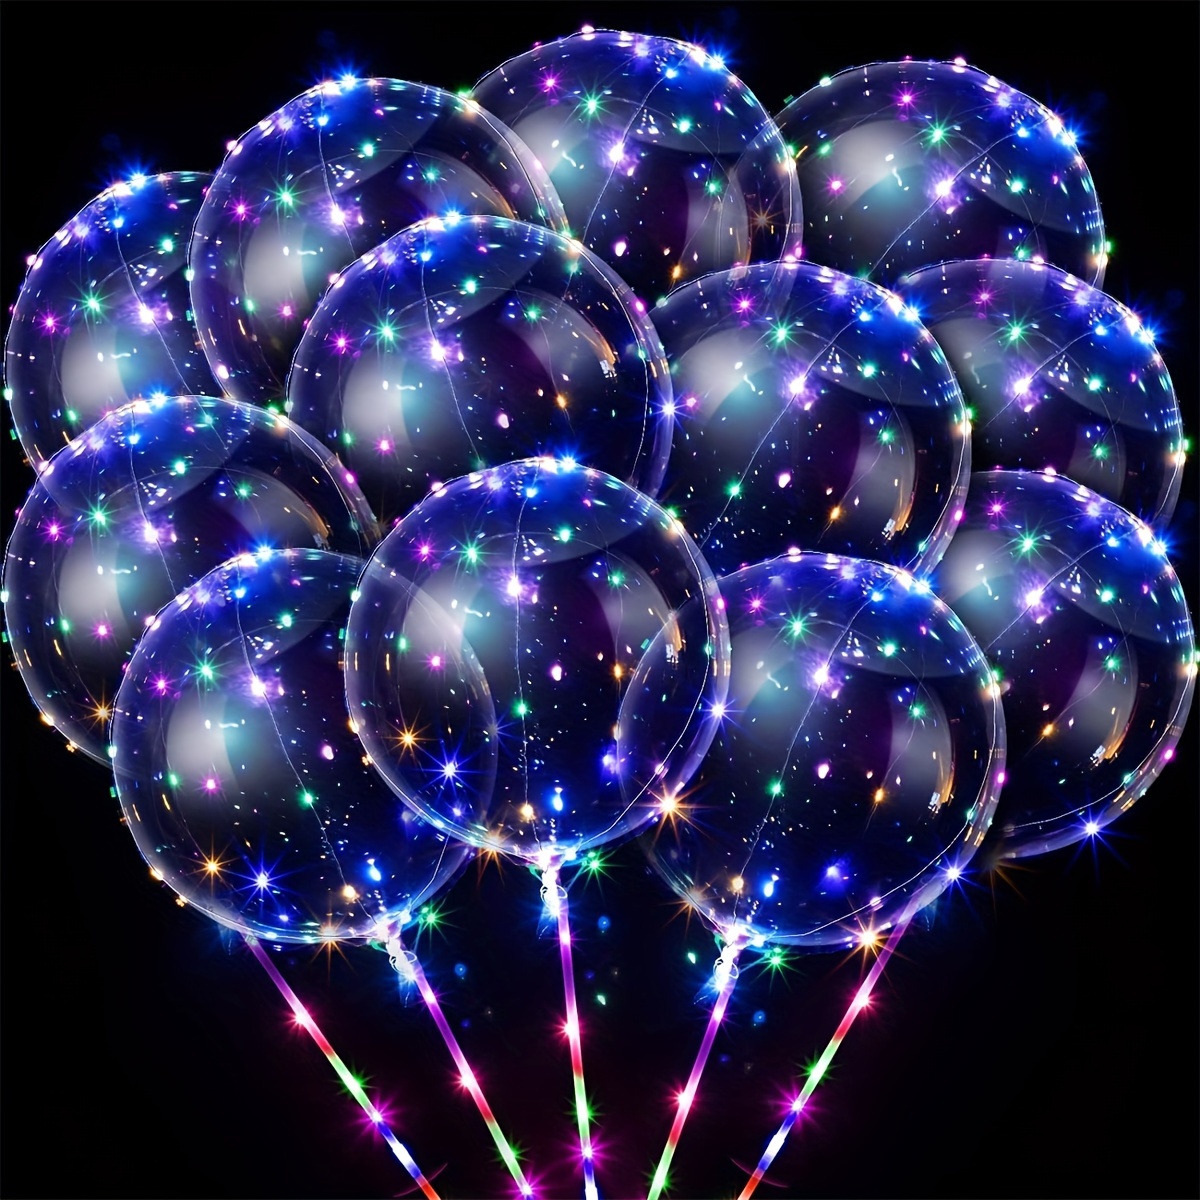 

18pcs Led Luminous Transparent Balloons Set With Balloon Robs, 3 Meters Led Luminous String Lights, Transparent Balloons For Birthday Wedding Valentine's Day Mother's Day Eid Al-adha Mubarak